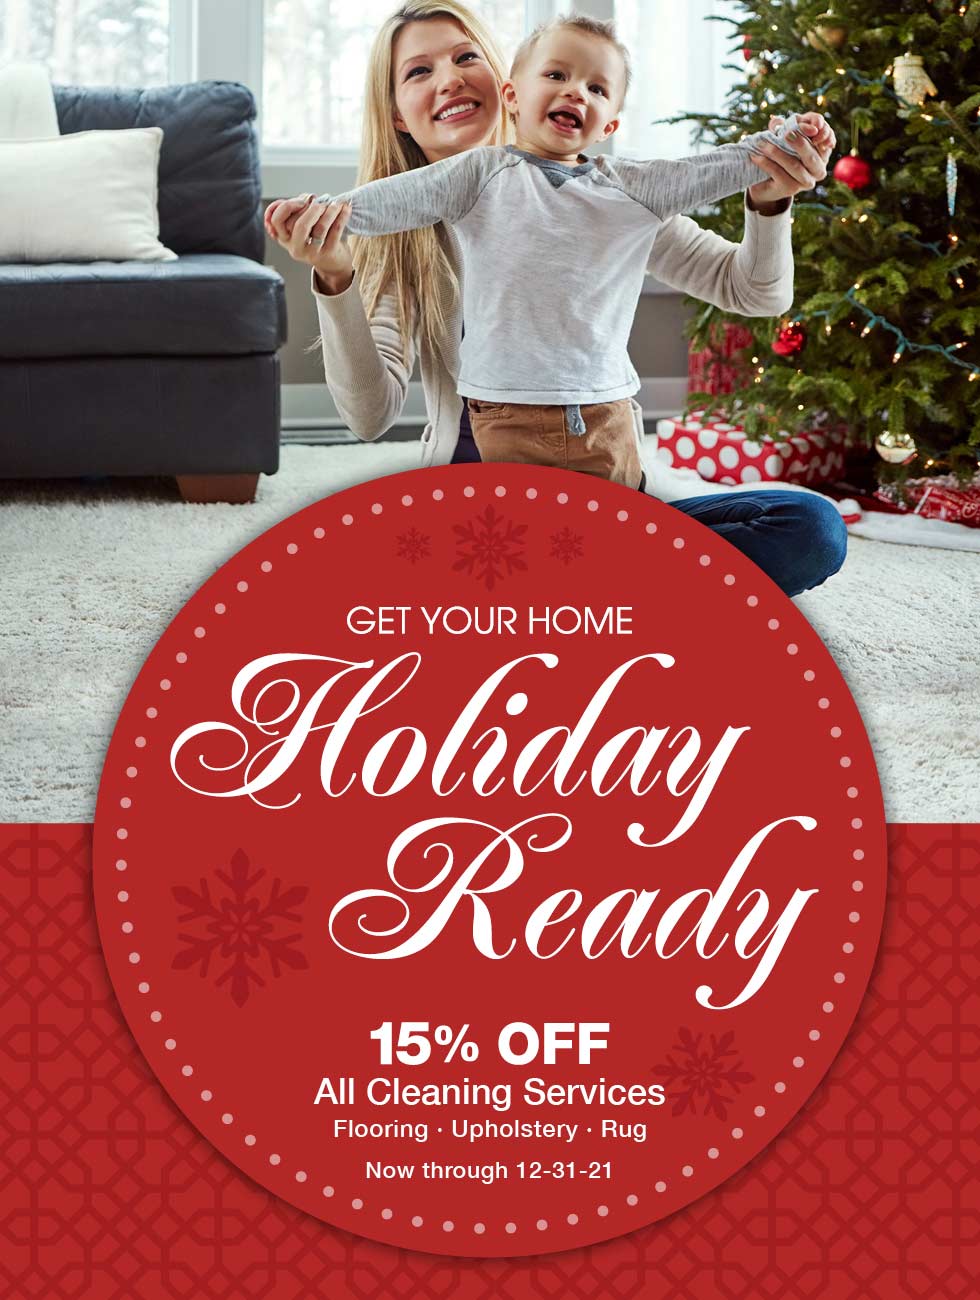 15% off all floor, upholstery, and rug cleaning services.